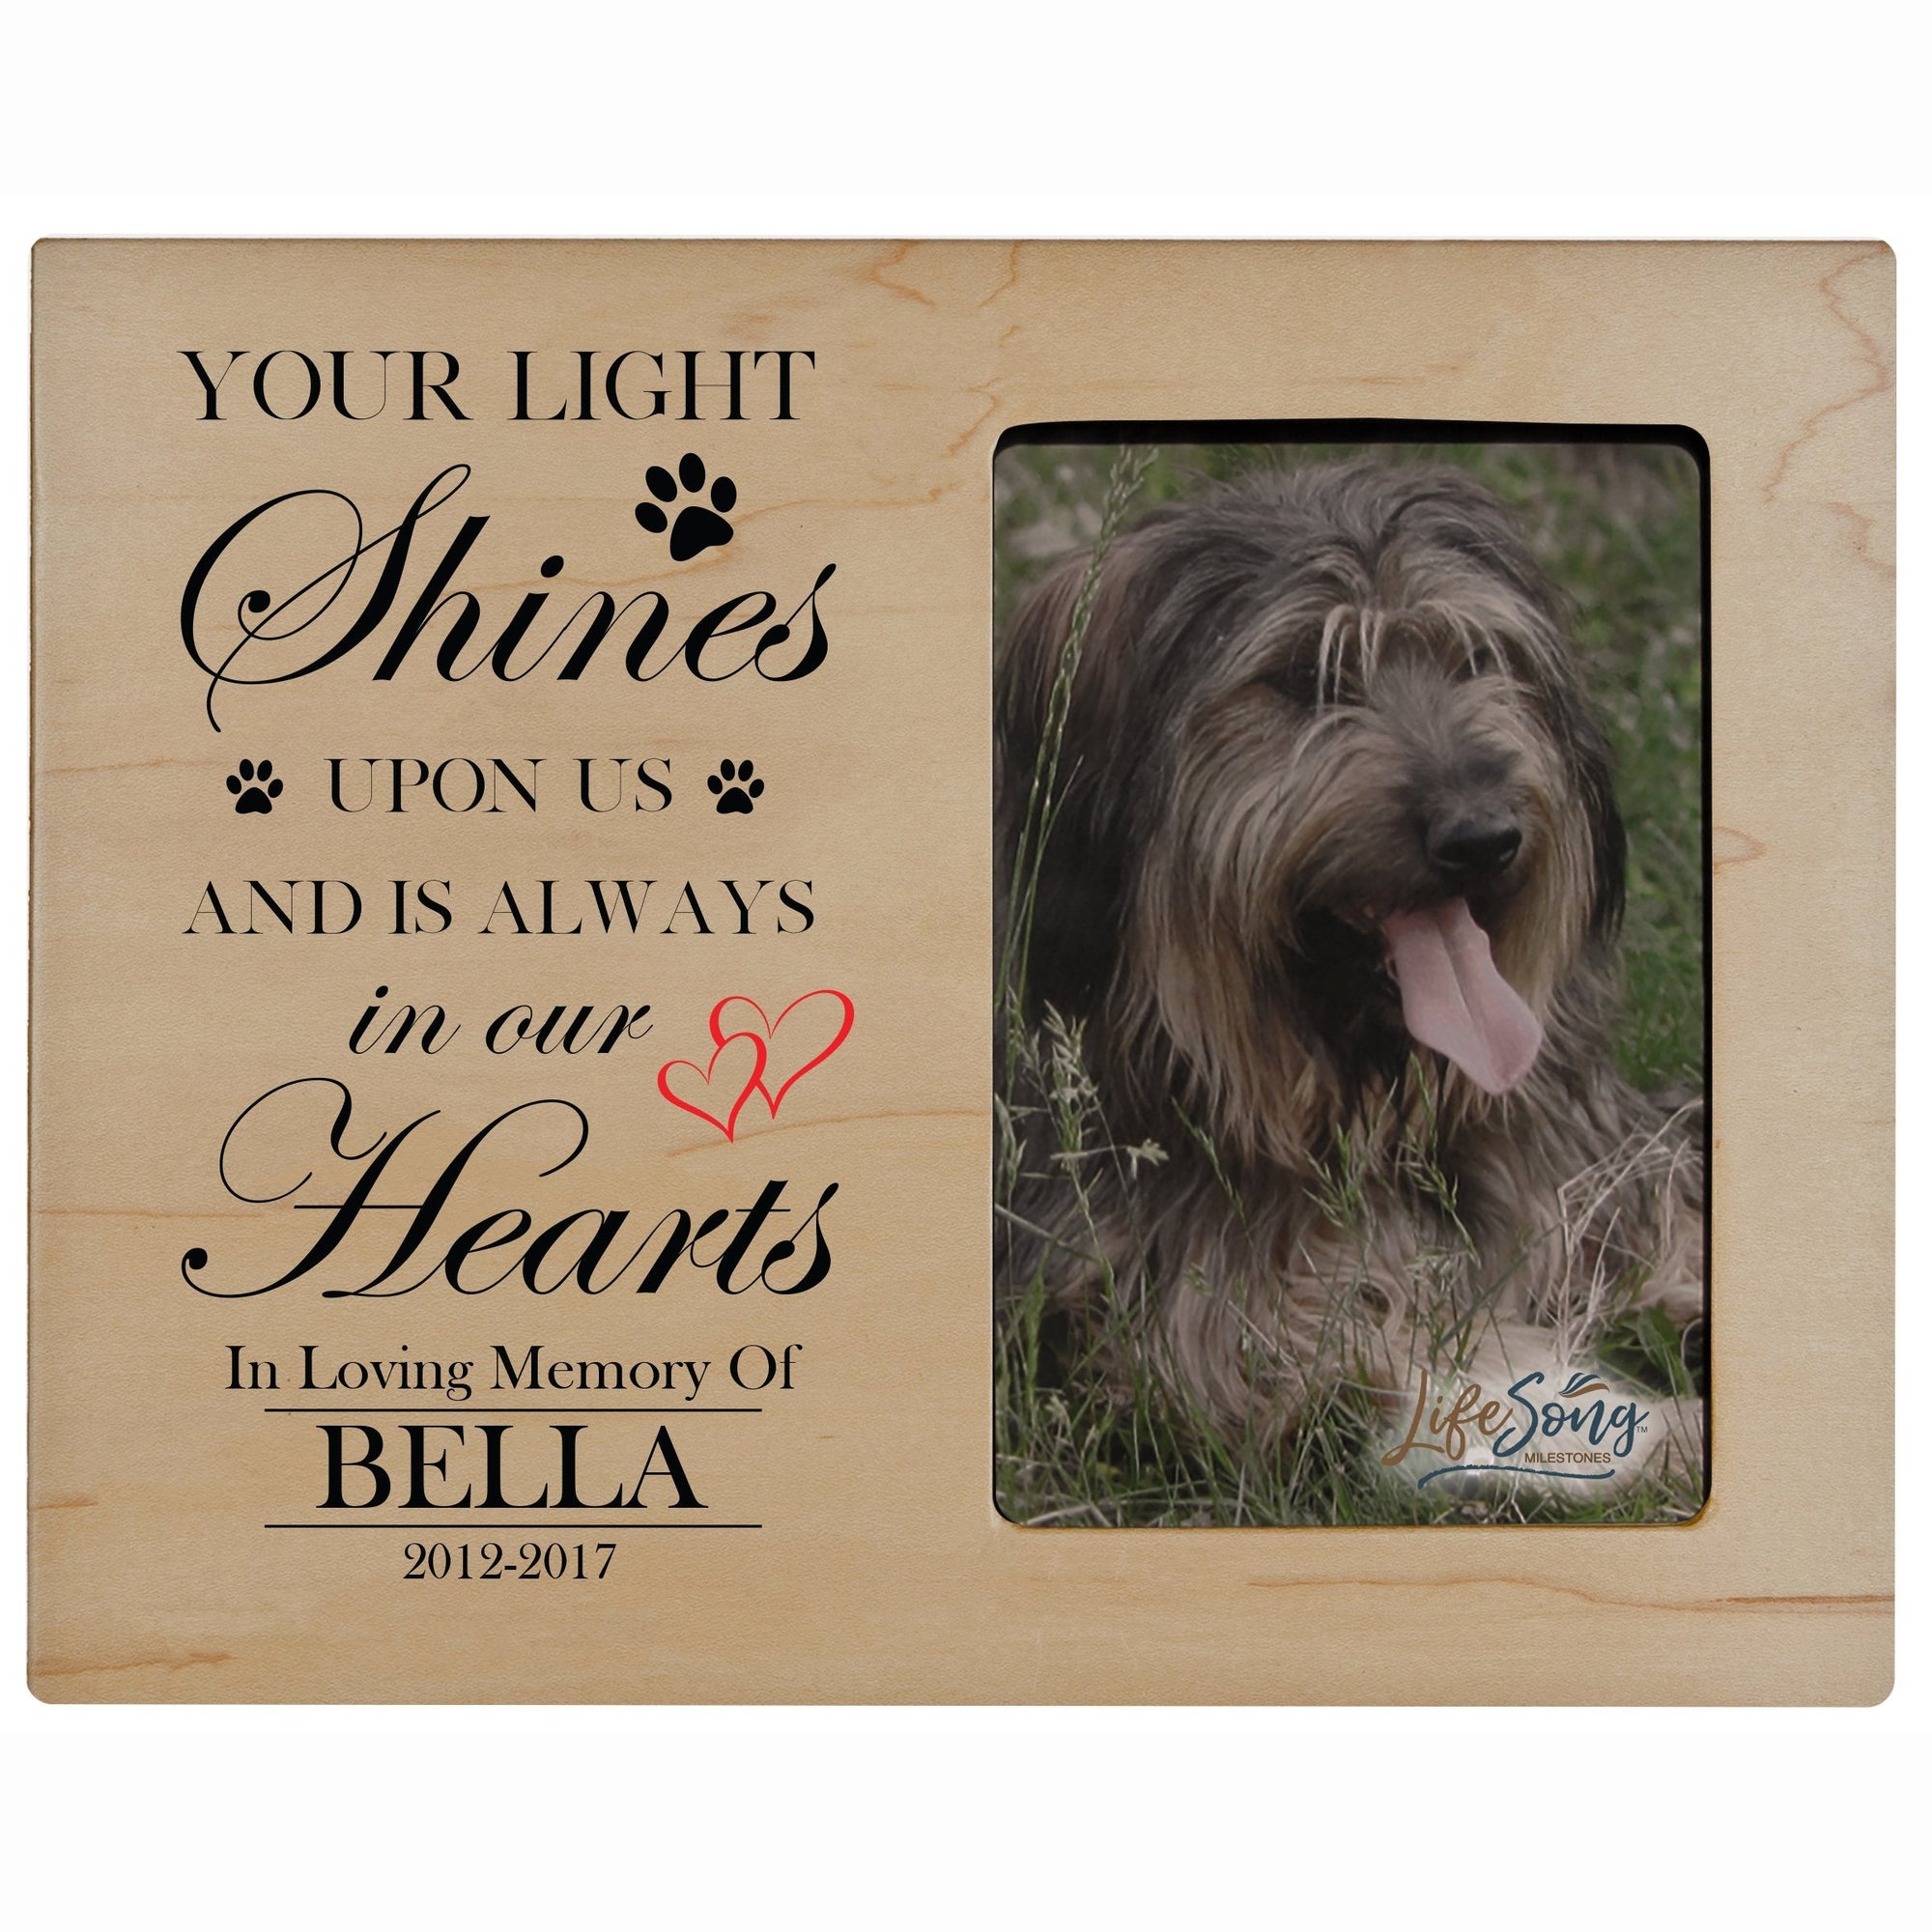 8x10 Maple Pet Memorial Picture Frame with the phrase "Your Light Shines Upon Us"